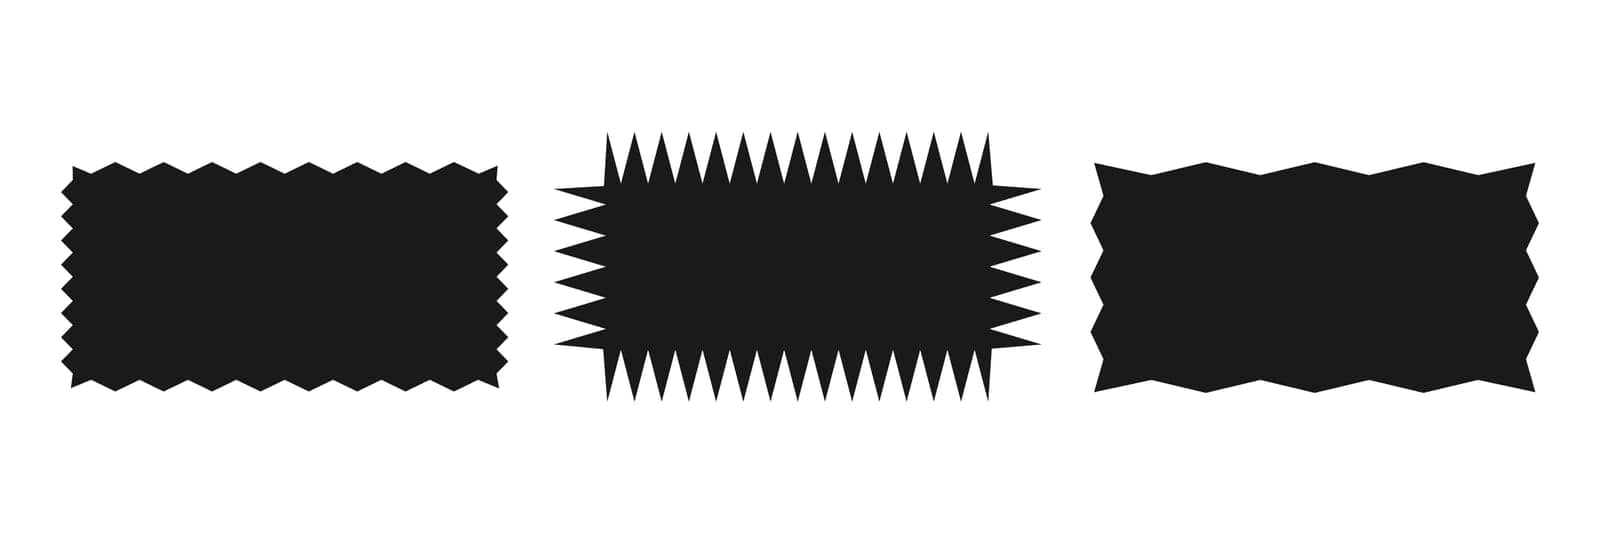 Zigzag rectangular shape.A set of uneven zigzag rectangular shapes. Black color. Isolated elements for design of text box, button, badge, banner, tag, sticker, badge. Vector illustration.